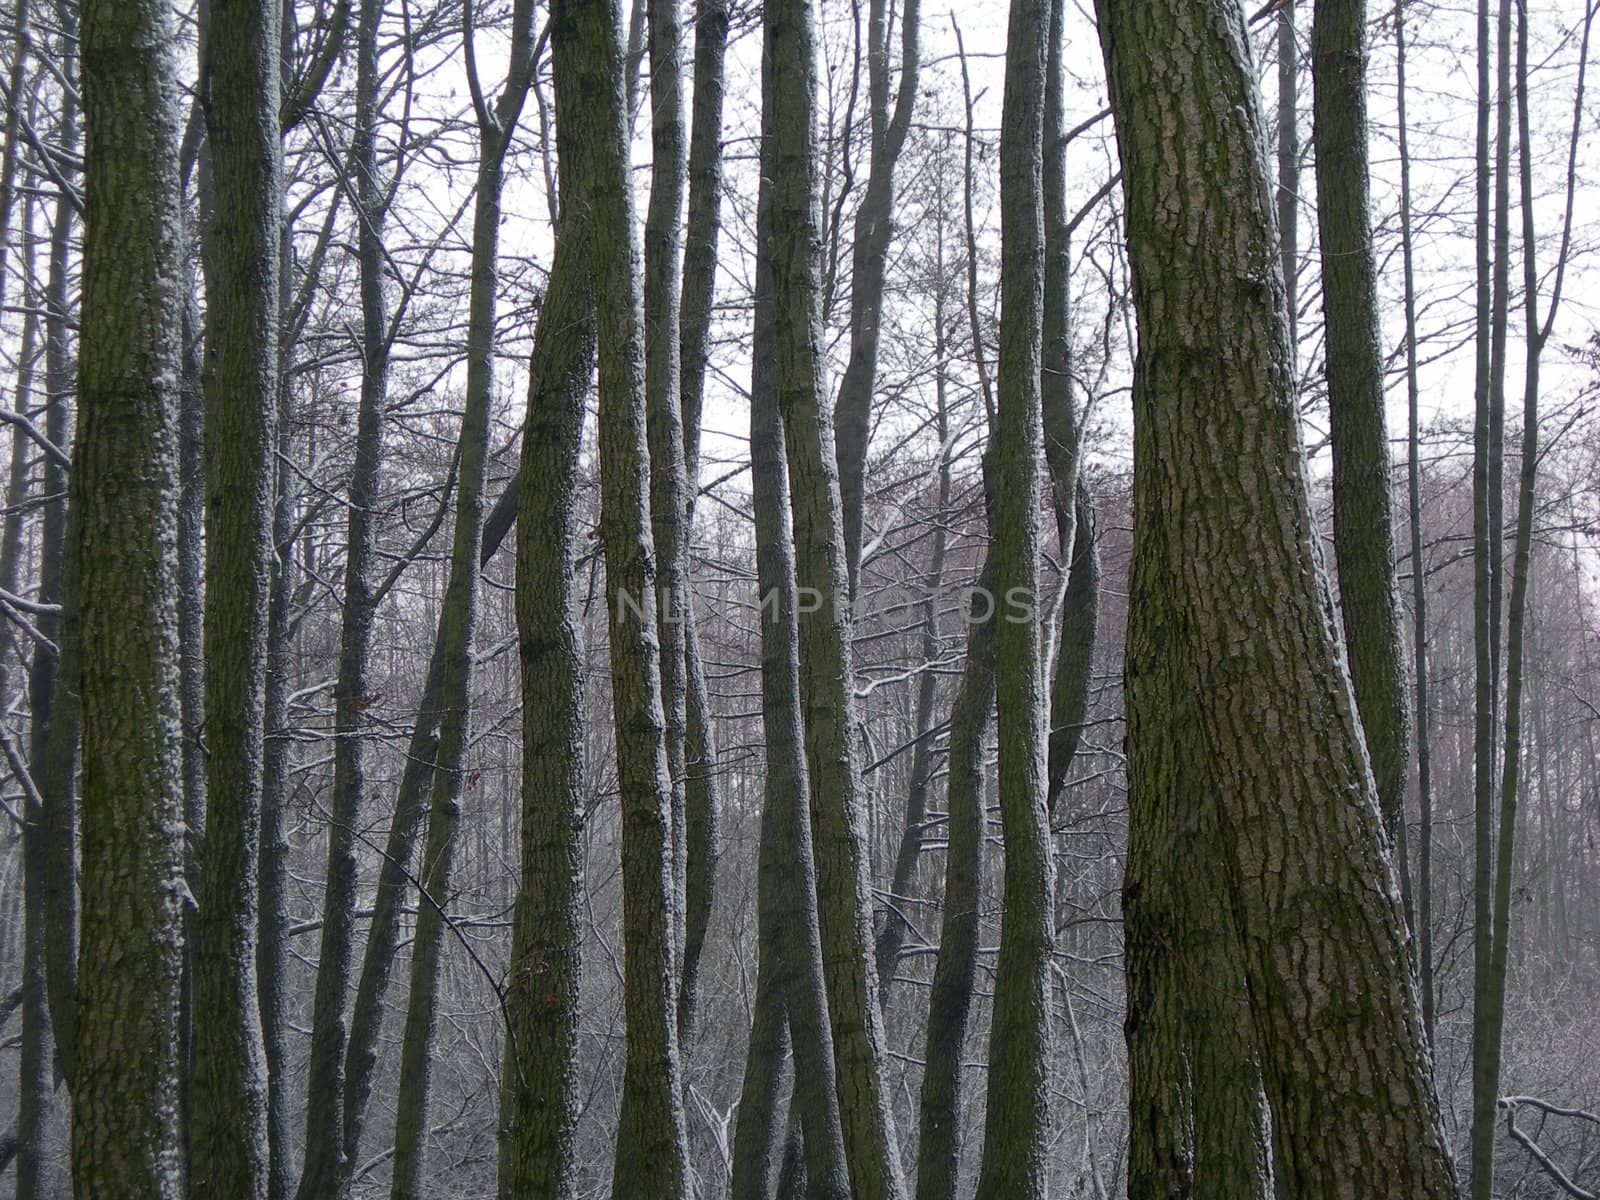           Trees in the forest are covered with snow